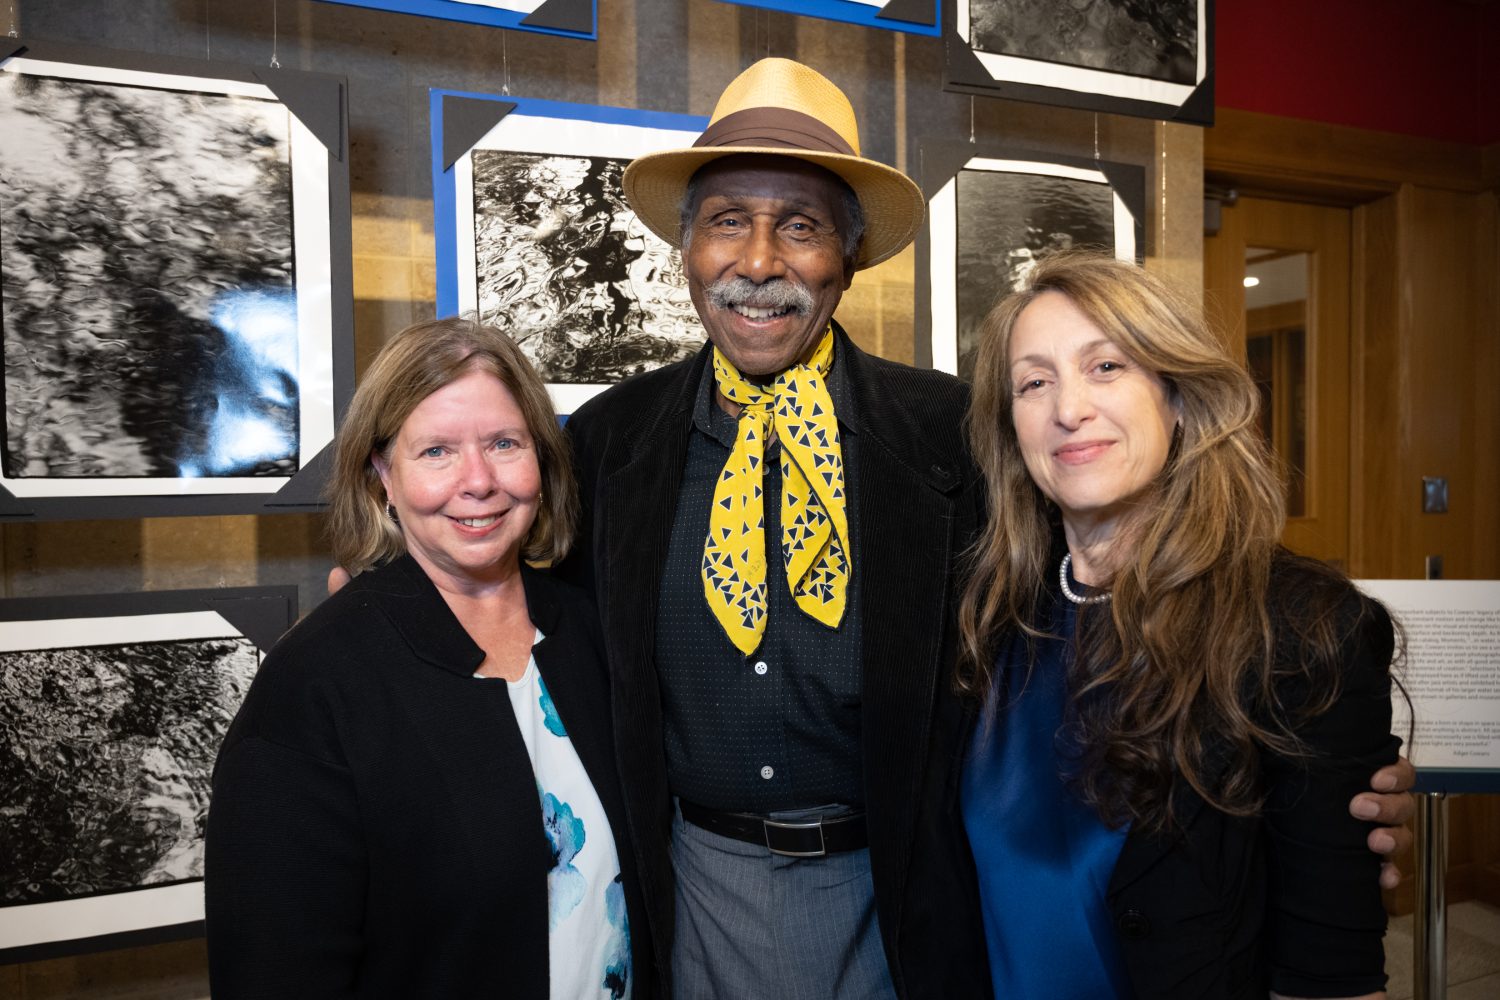 Lisa German, Adger Cowans, and Deborah Ultan at the exhibit opening reception for “The Eyes See What the Heart Feels.” (Photo/Kristine Heykants)